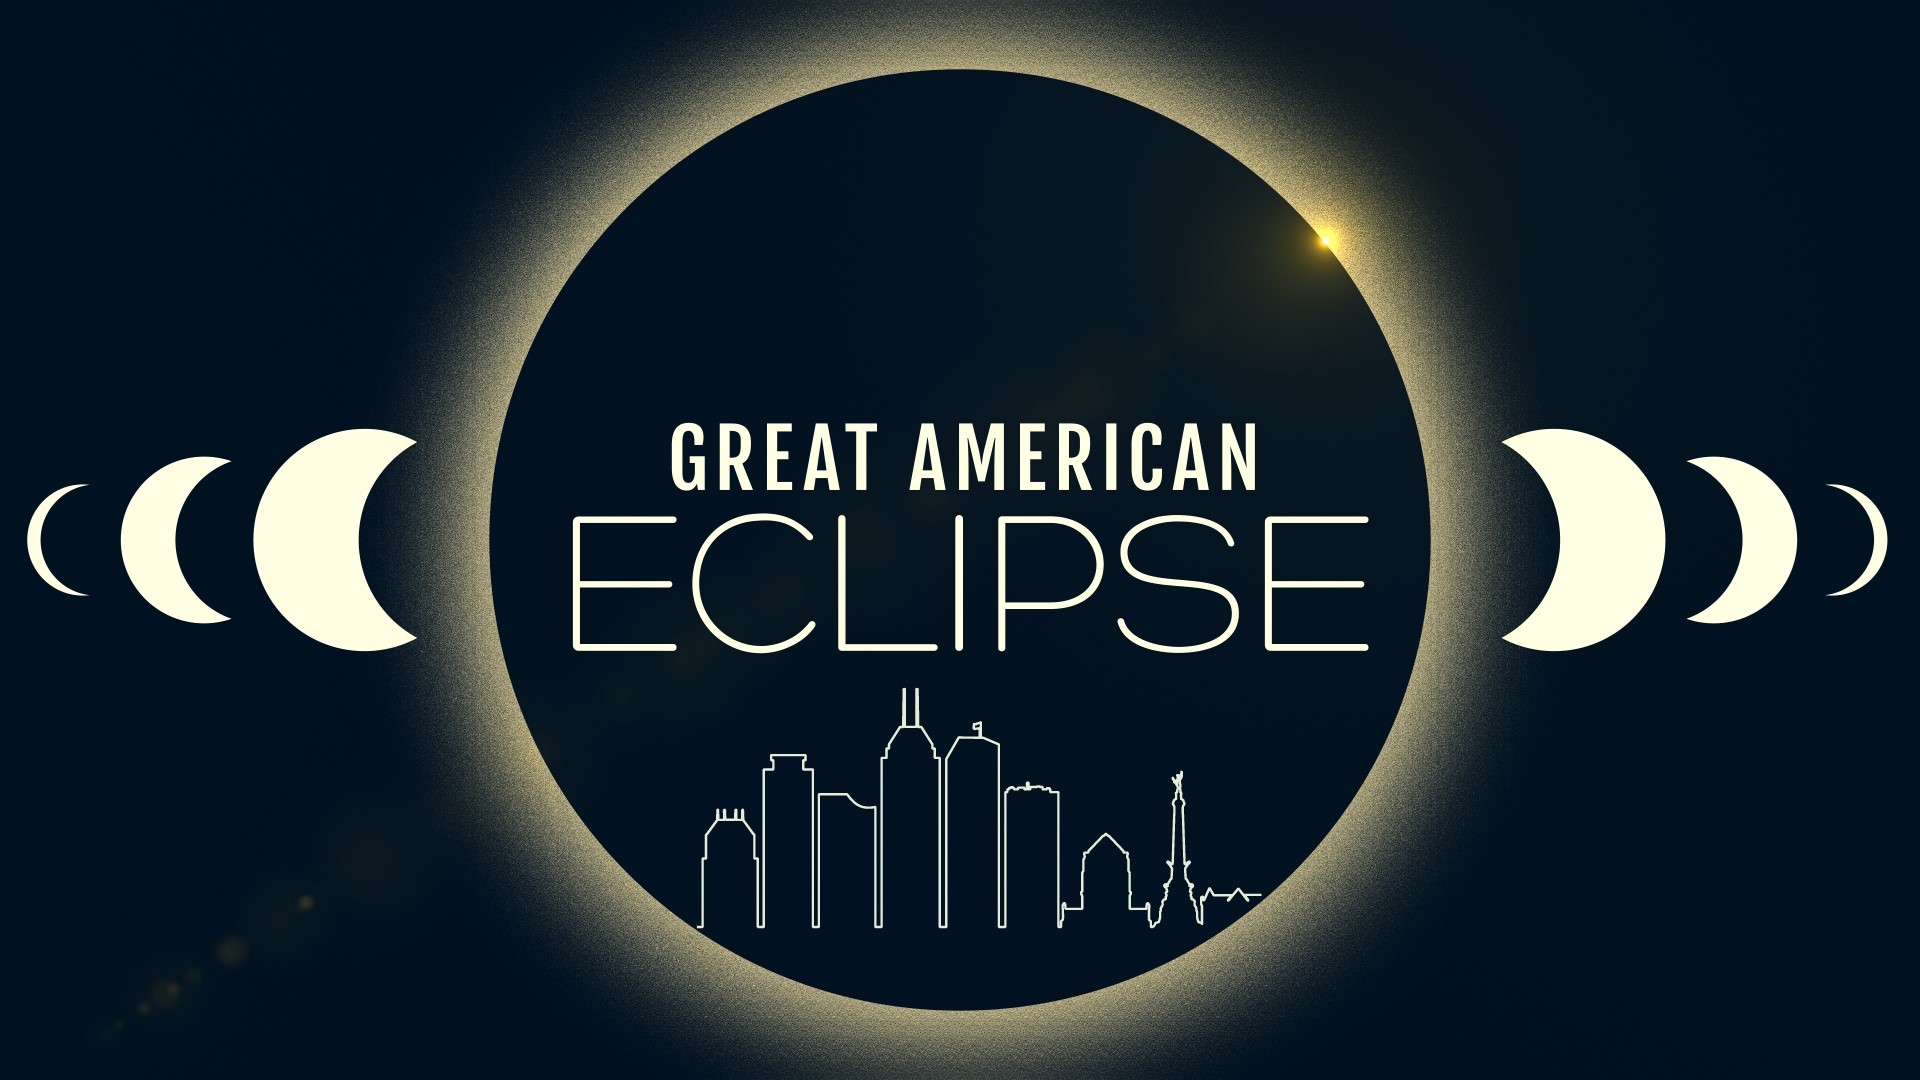 The duration of totality in Indianapolis will be 3 minutes, 51 seconds. See how Central Indiana is getting ready for the eclipse on April 8th, 2024.